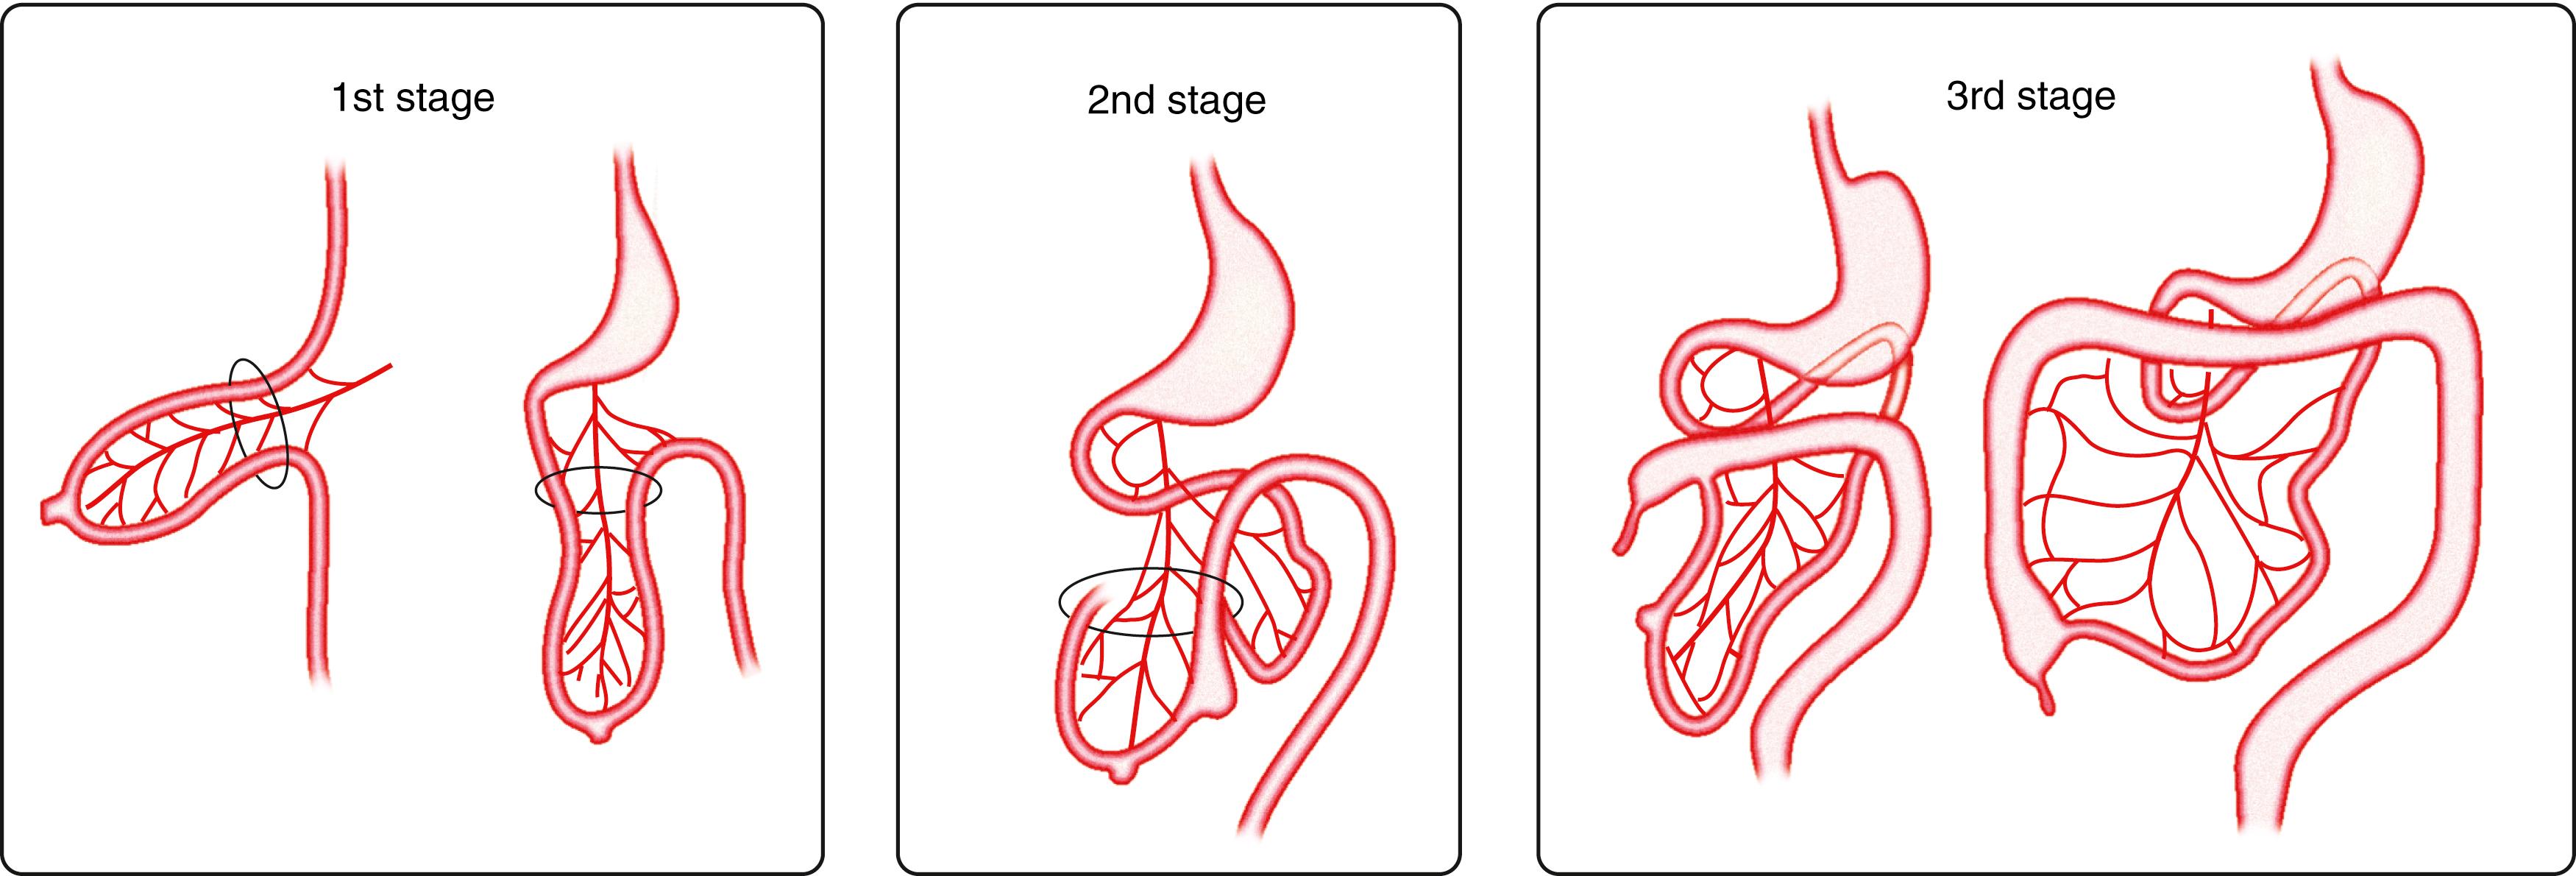 Fig. 98.14, The 3 stages of normal intestinal rotation (see text for details). (From Gosche JR, Touloukian RJ. Congenital anomalies of the midgut. In: Wyllie R, Hyams JS, editors. Pediatric gastrointestinal disease. Pathophysiology, diagnosis, management. 2nd ed. Philadelphia: WB Saunders; 1999.)